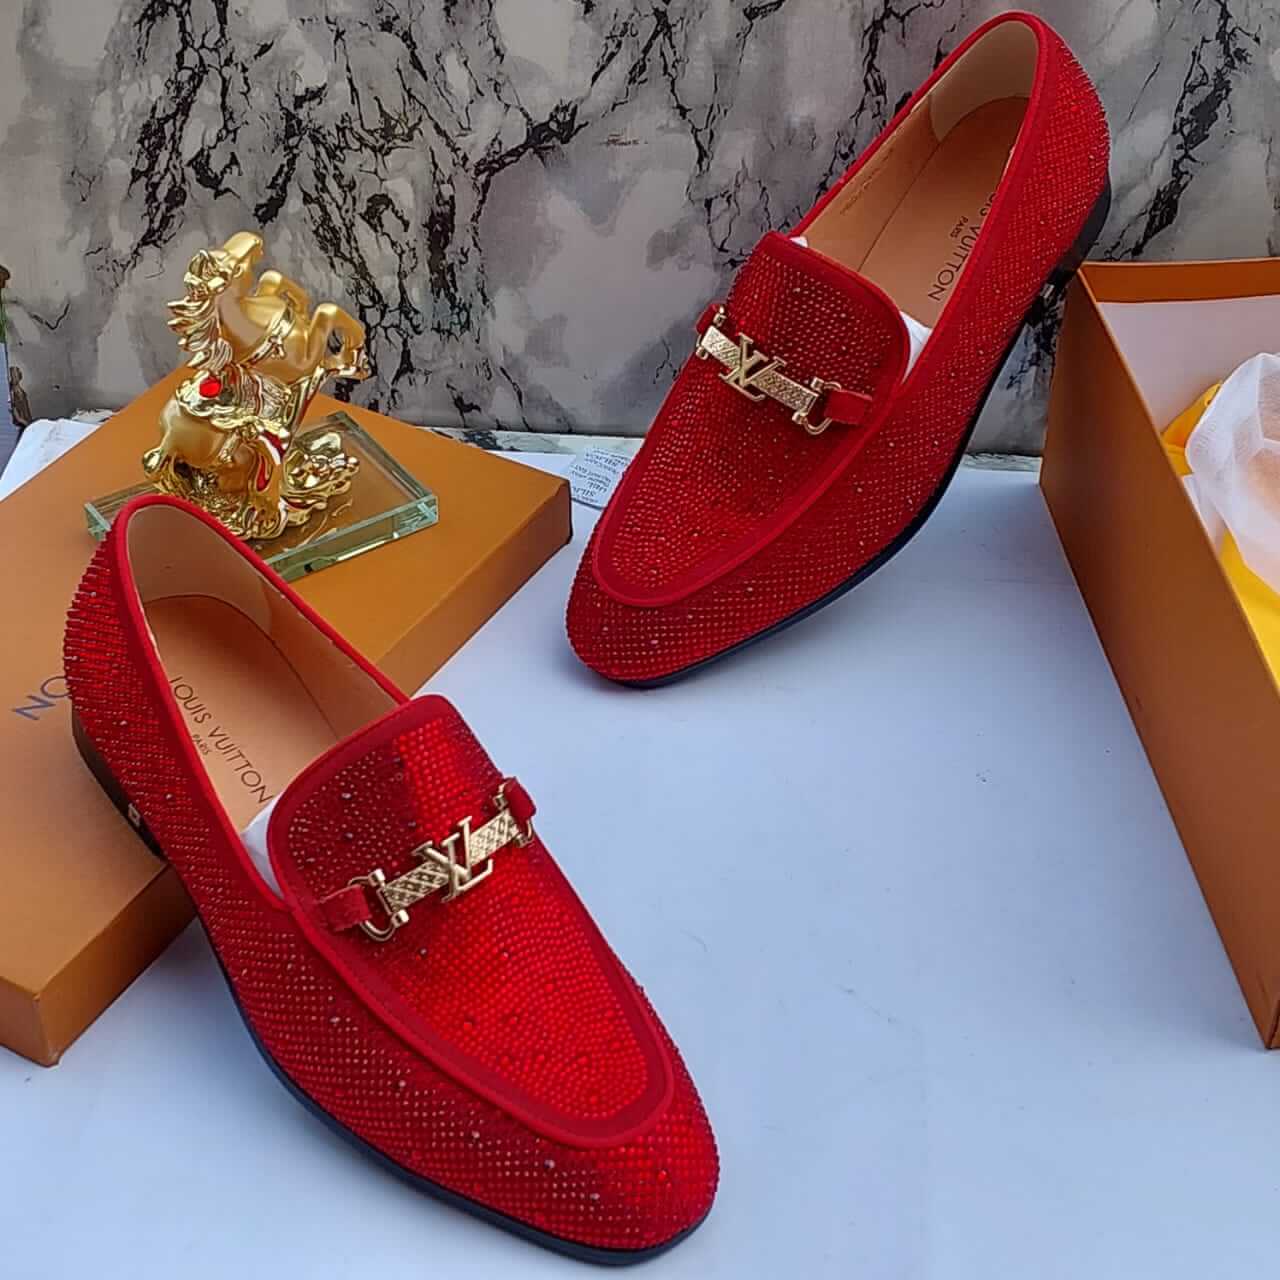 Louis Vuitton Red Pane Leather Shoe